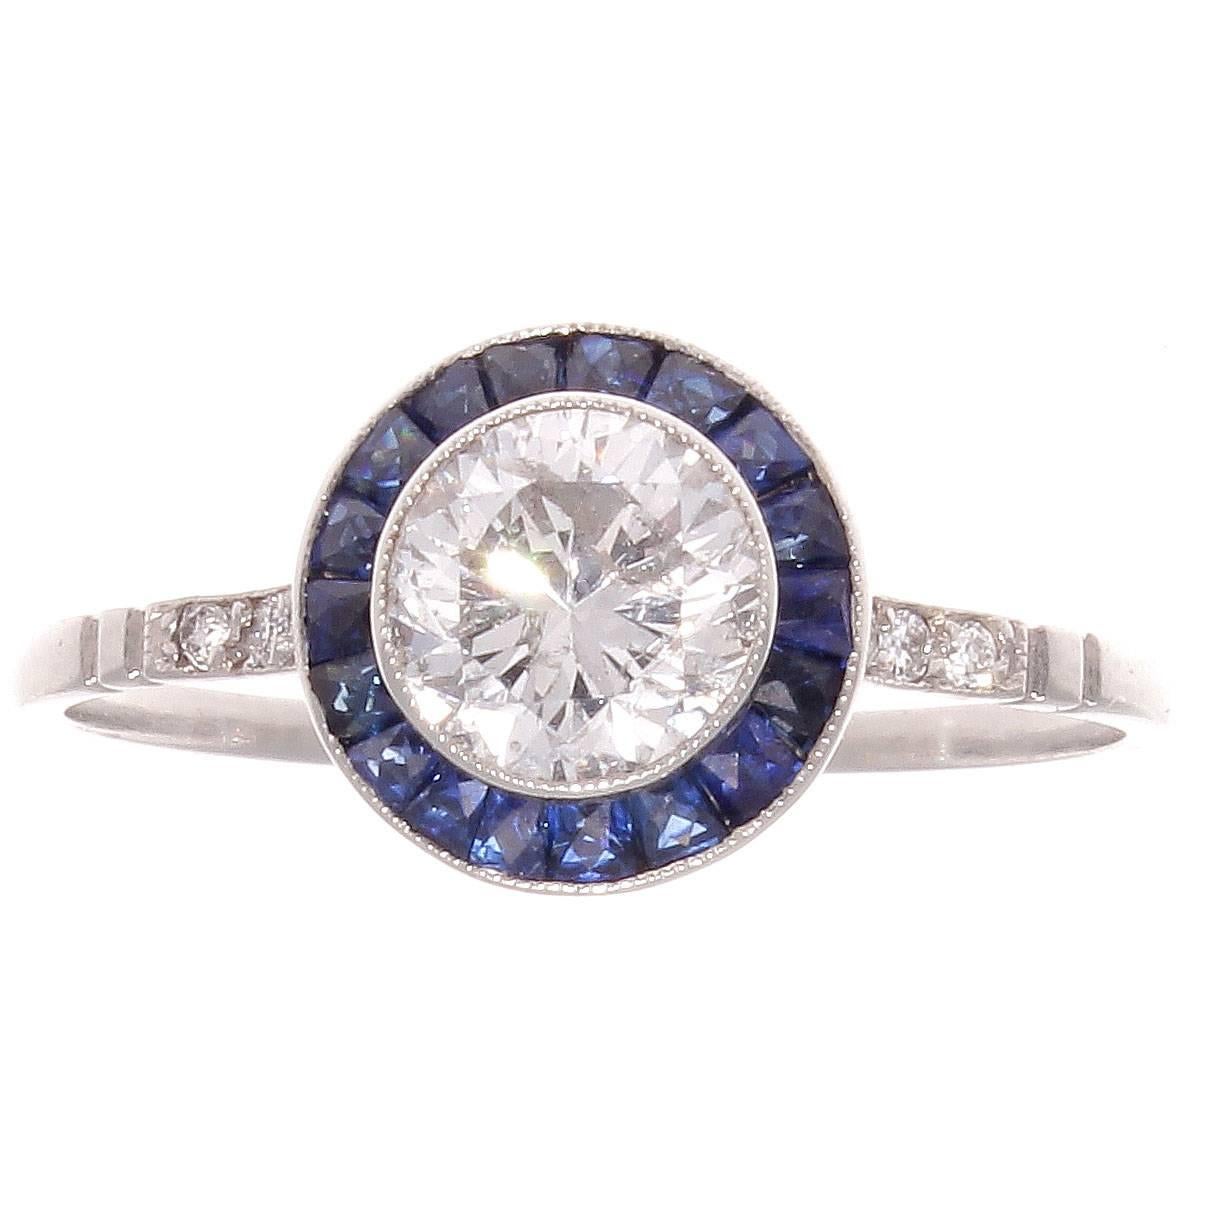 The glamorous era of the art deco period have influenced designers to recreate the jewelry from this remarkable time. Featuring a 0.80 carat diamond that is H color, SI2 clarity surrounded by a halo of navy blue sapphires. Crafted in platinum.